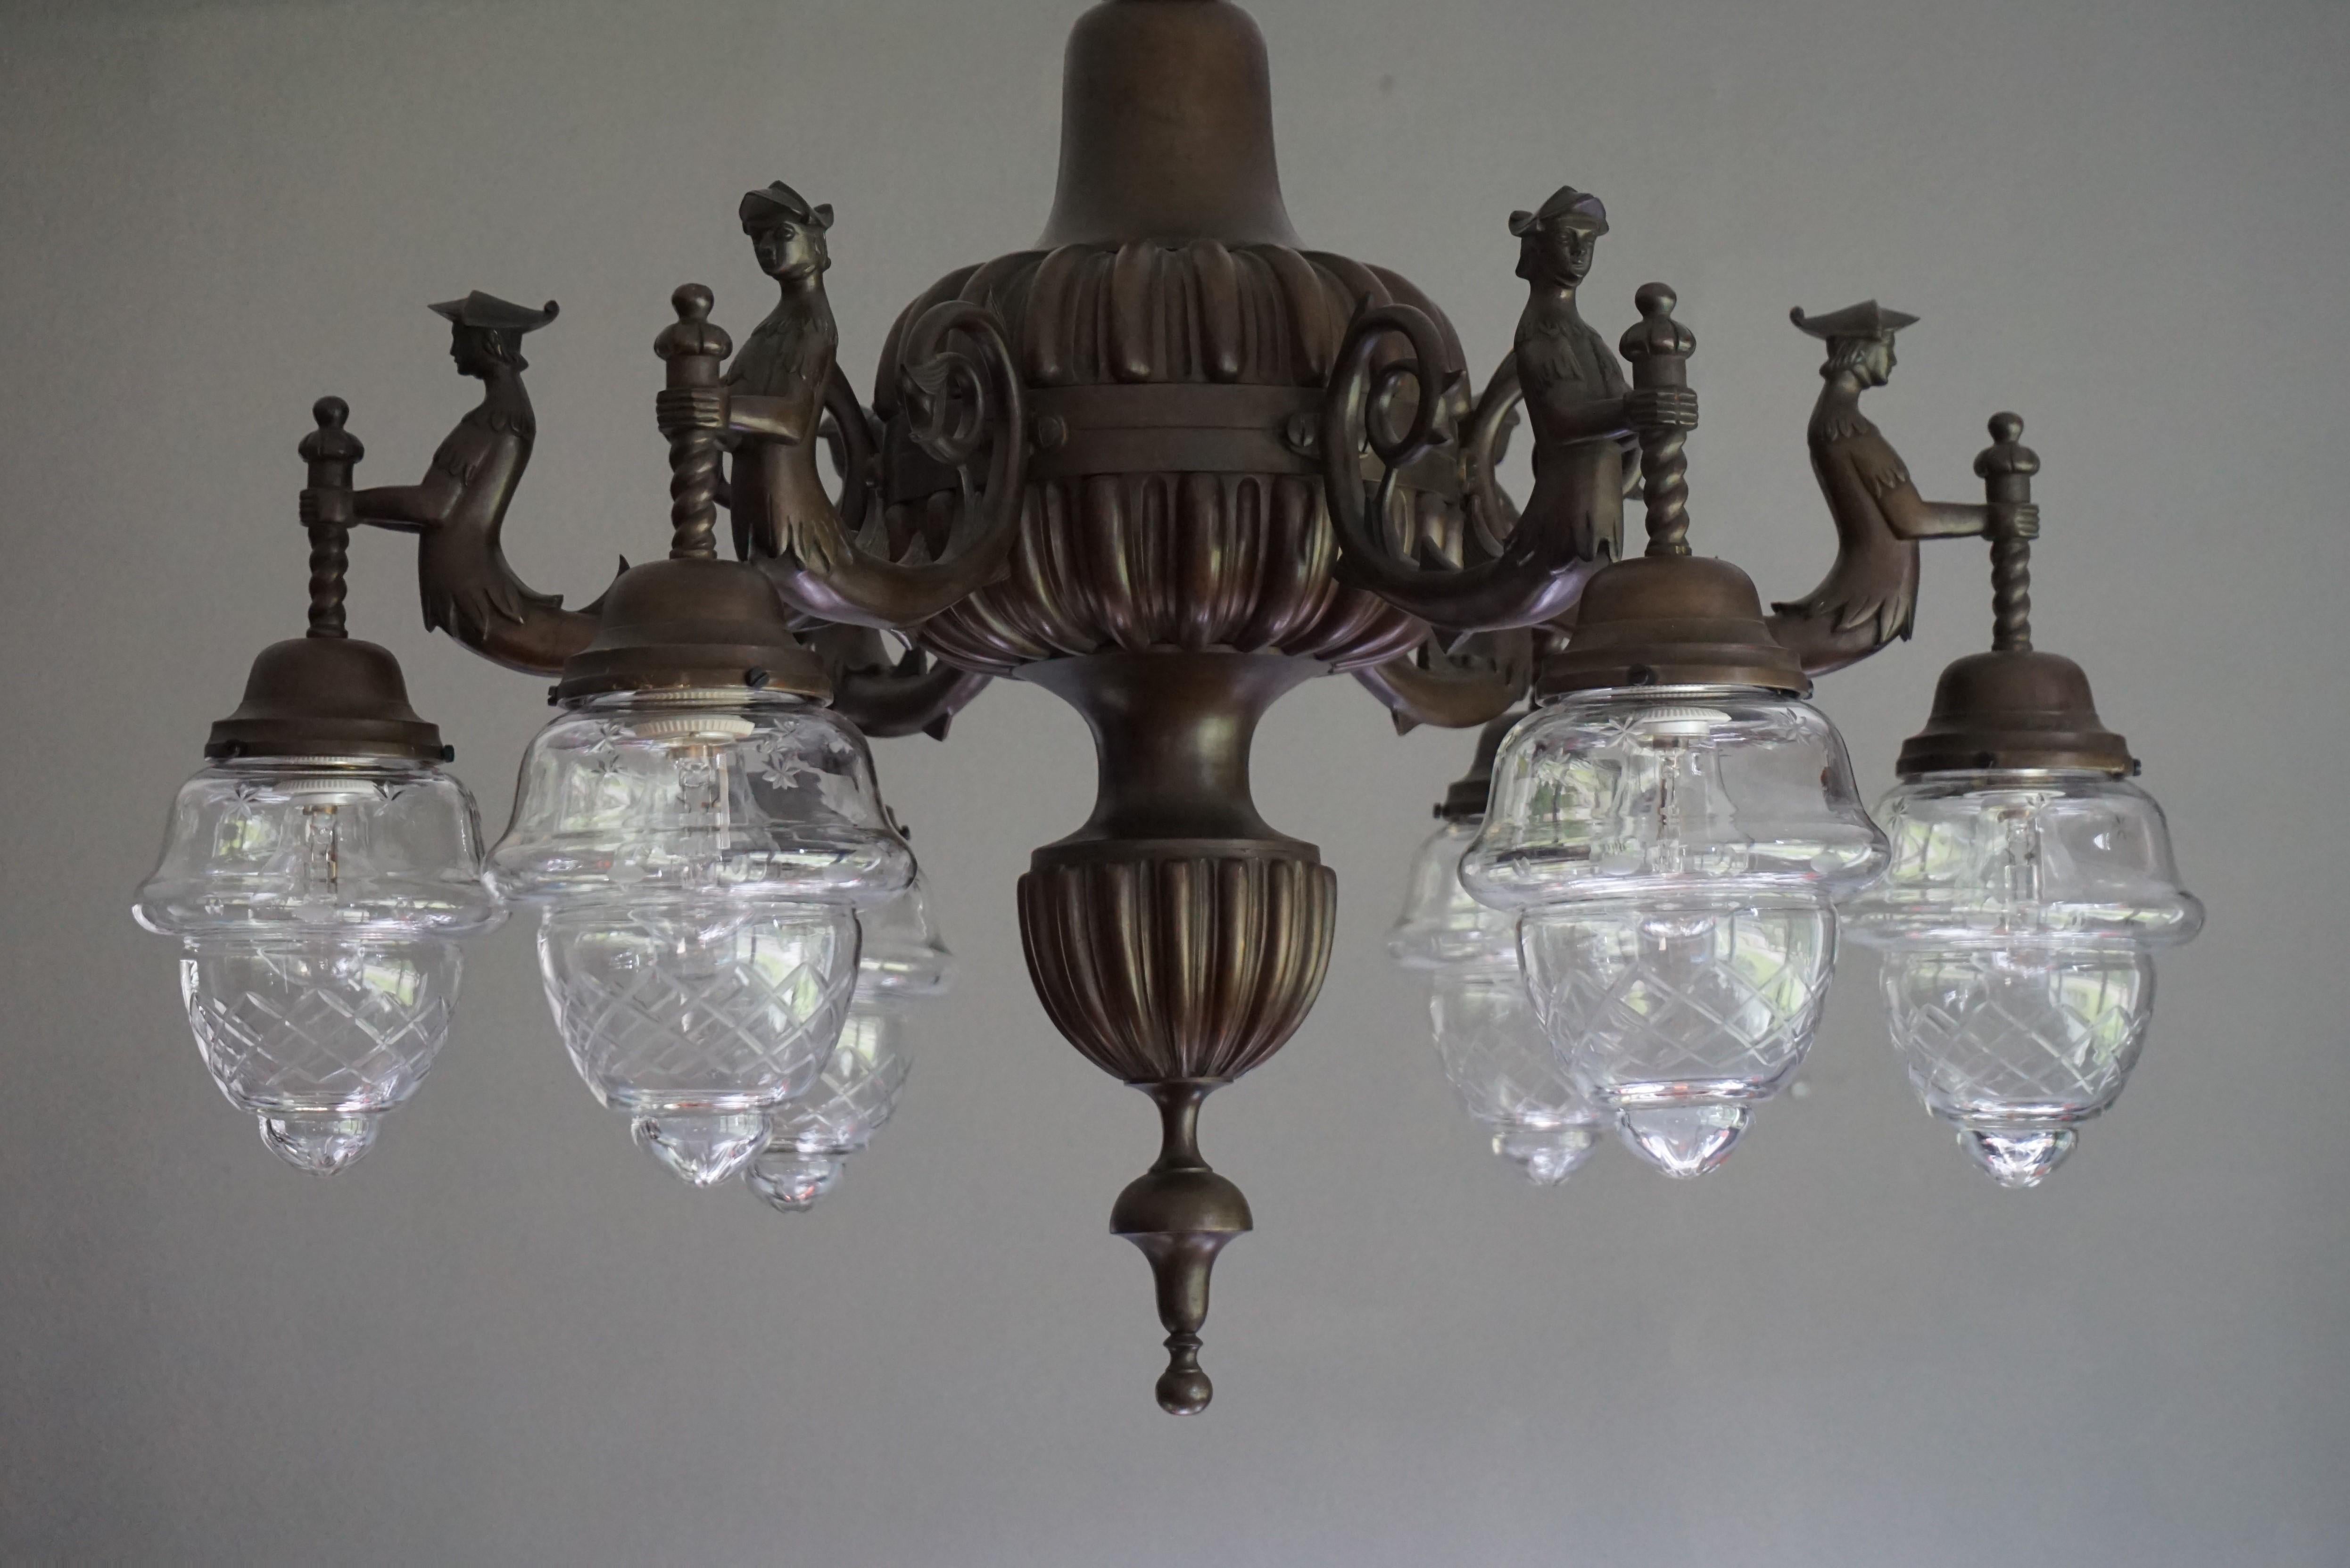 Large Six-Light Bronze Chandelier with Folkore or Fable Hybrid Guard Sculptures For Sale 10